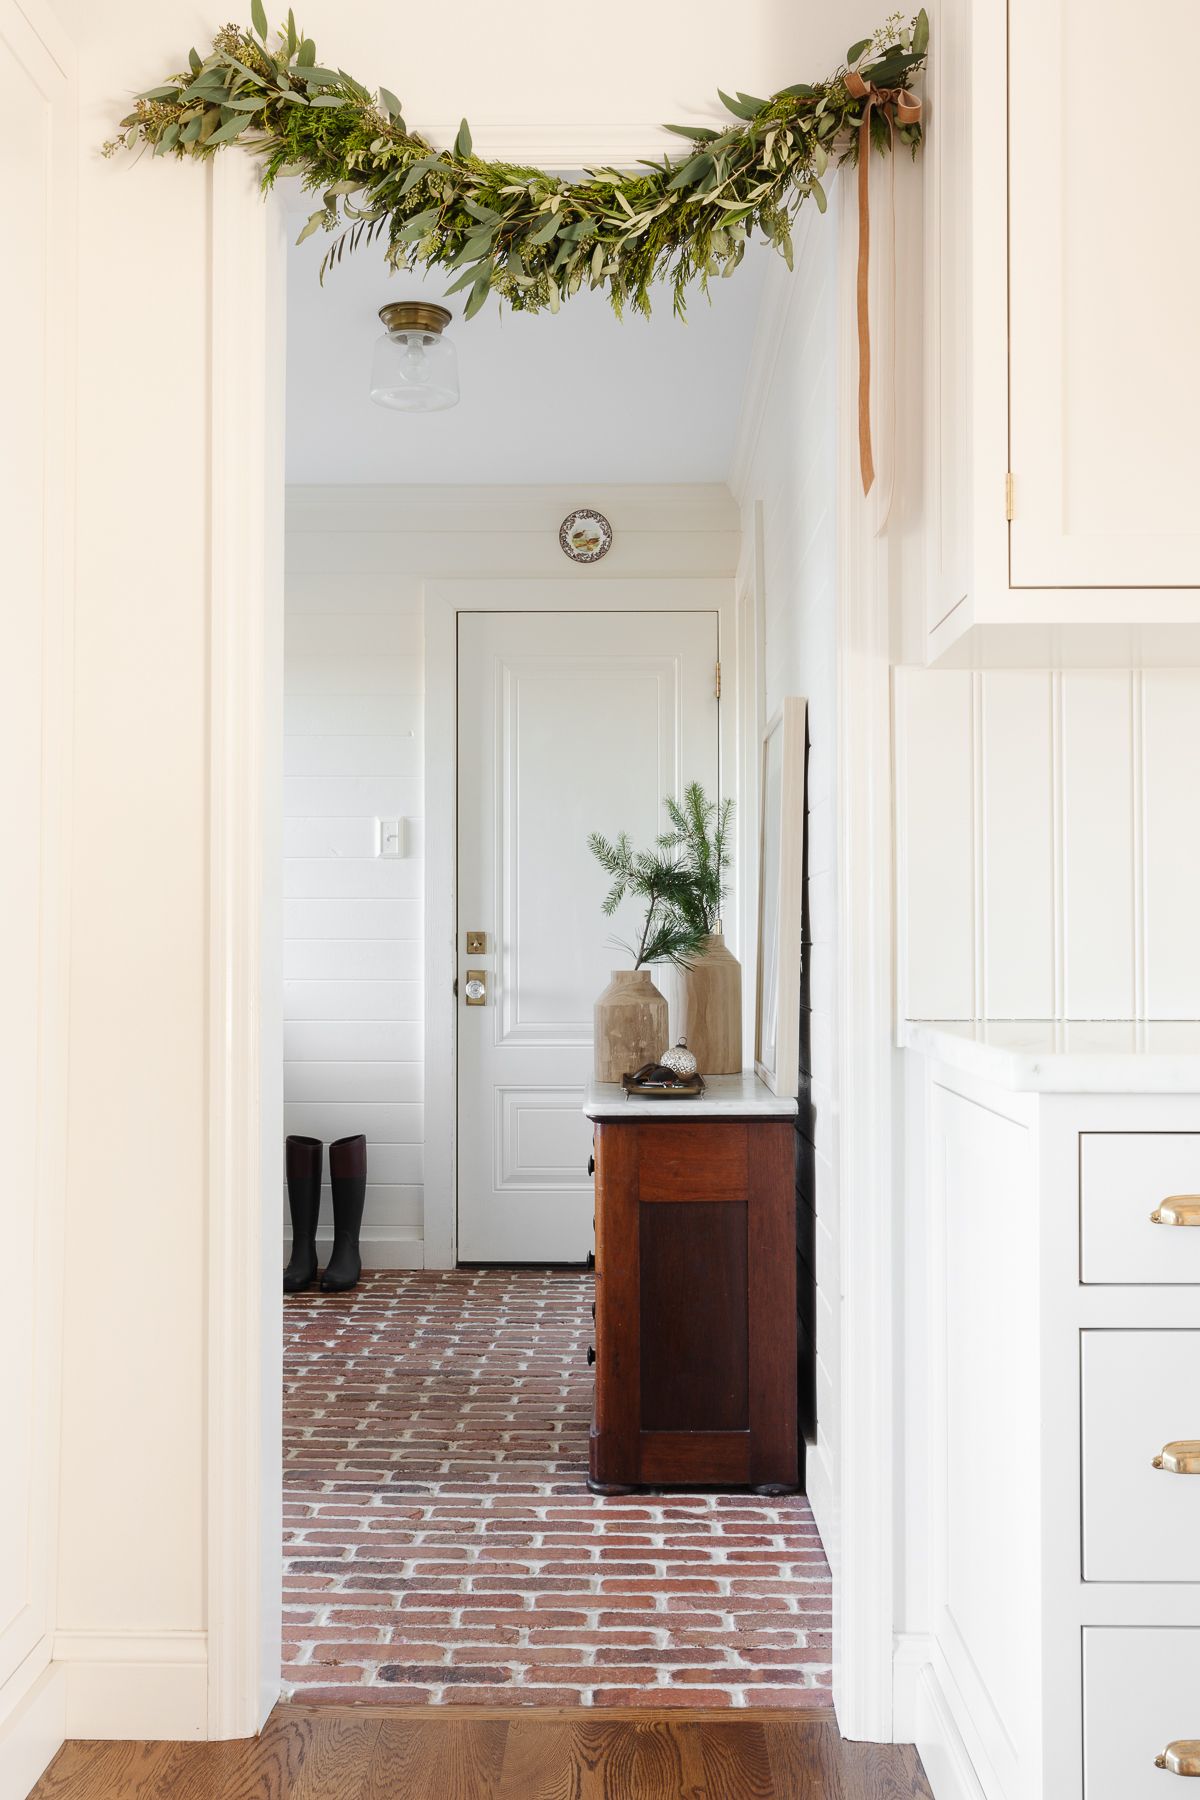 Fresh Christmas greenery garland over an entryway in a cream kitchen.